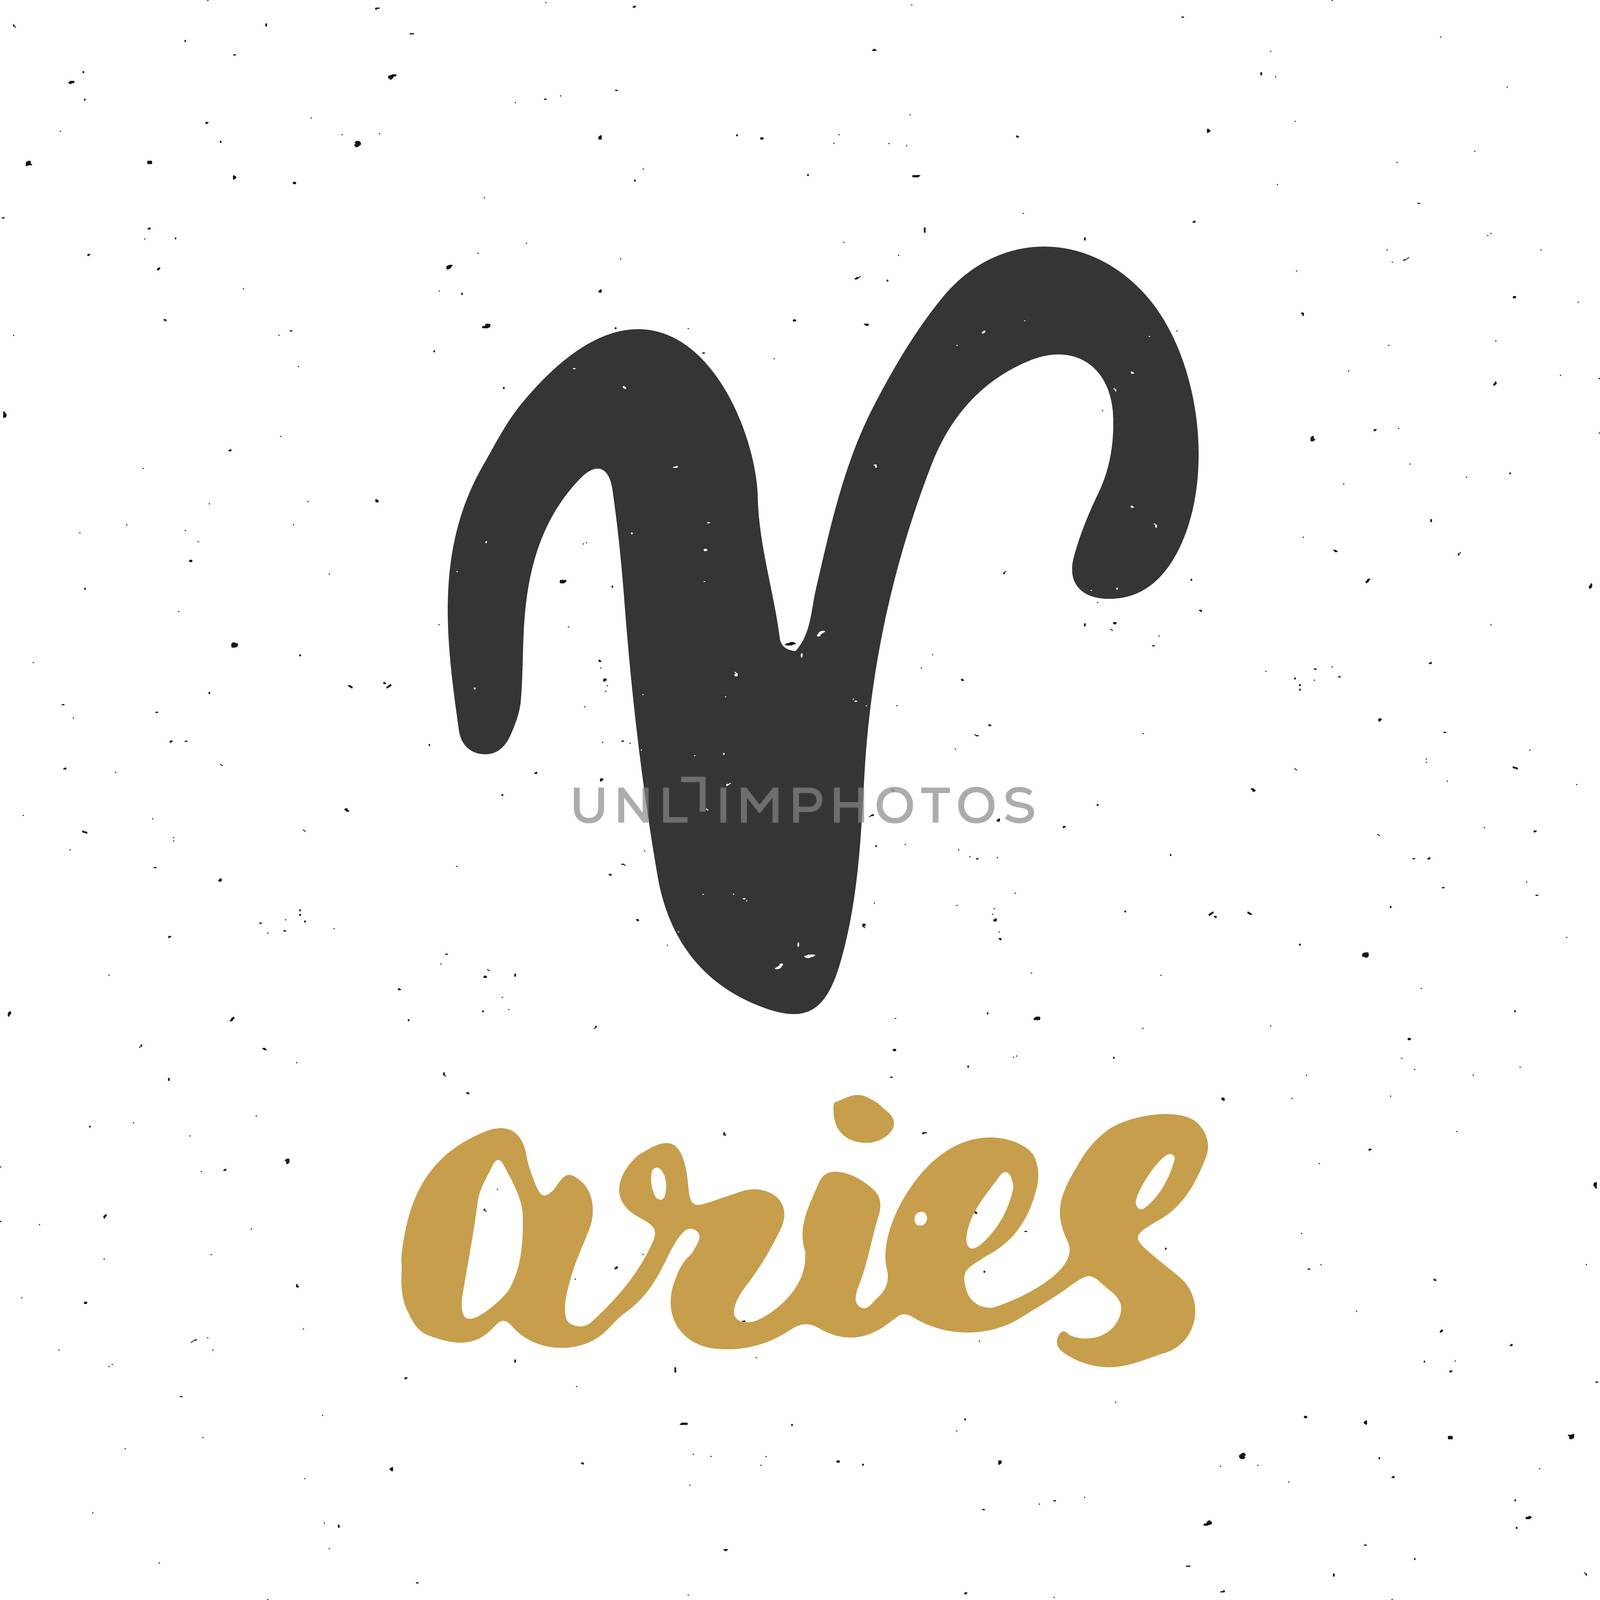 Zodiac sign Aries and lettering. Hand drawn horoscope astrology symbol, grunge textured design, typography print, vector illustration .